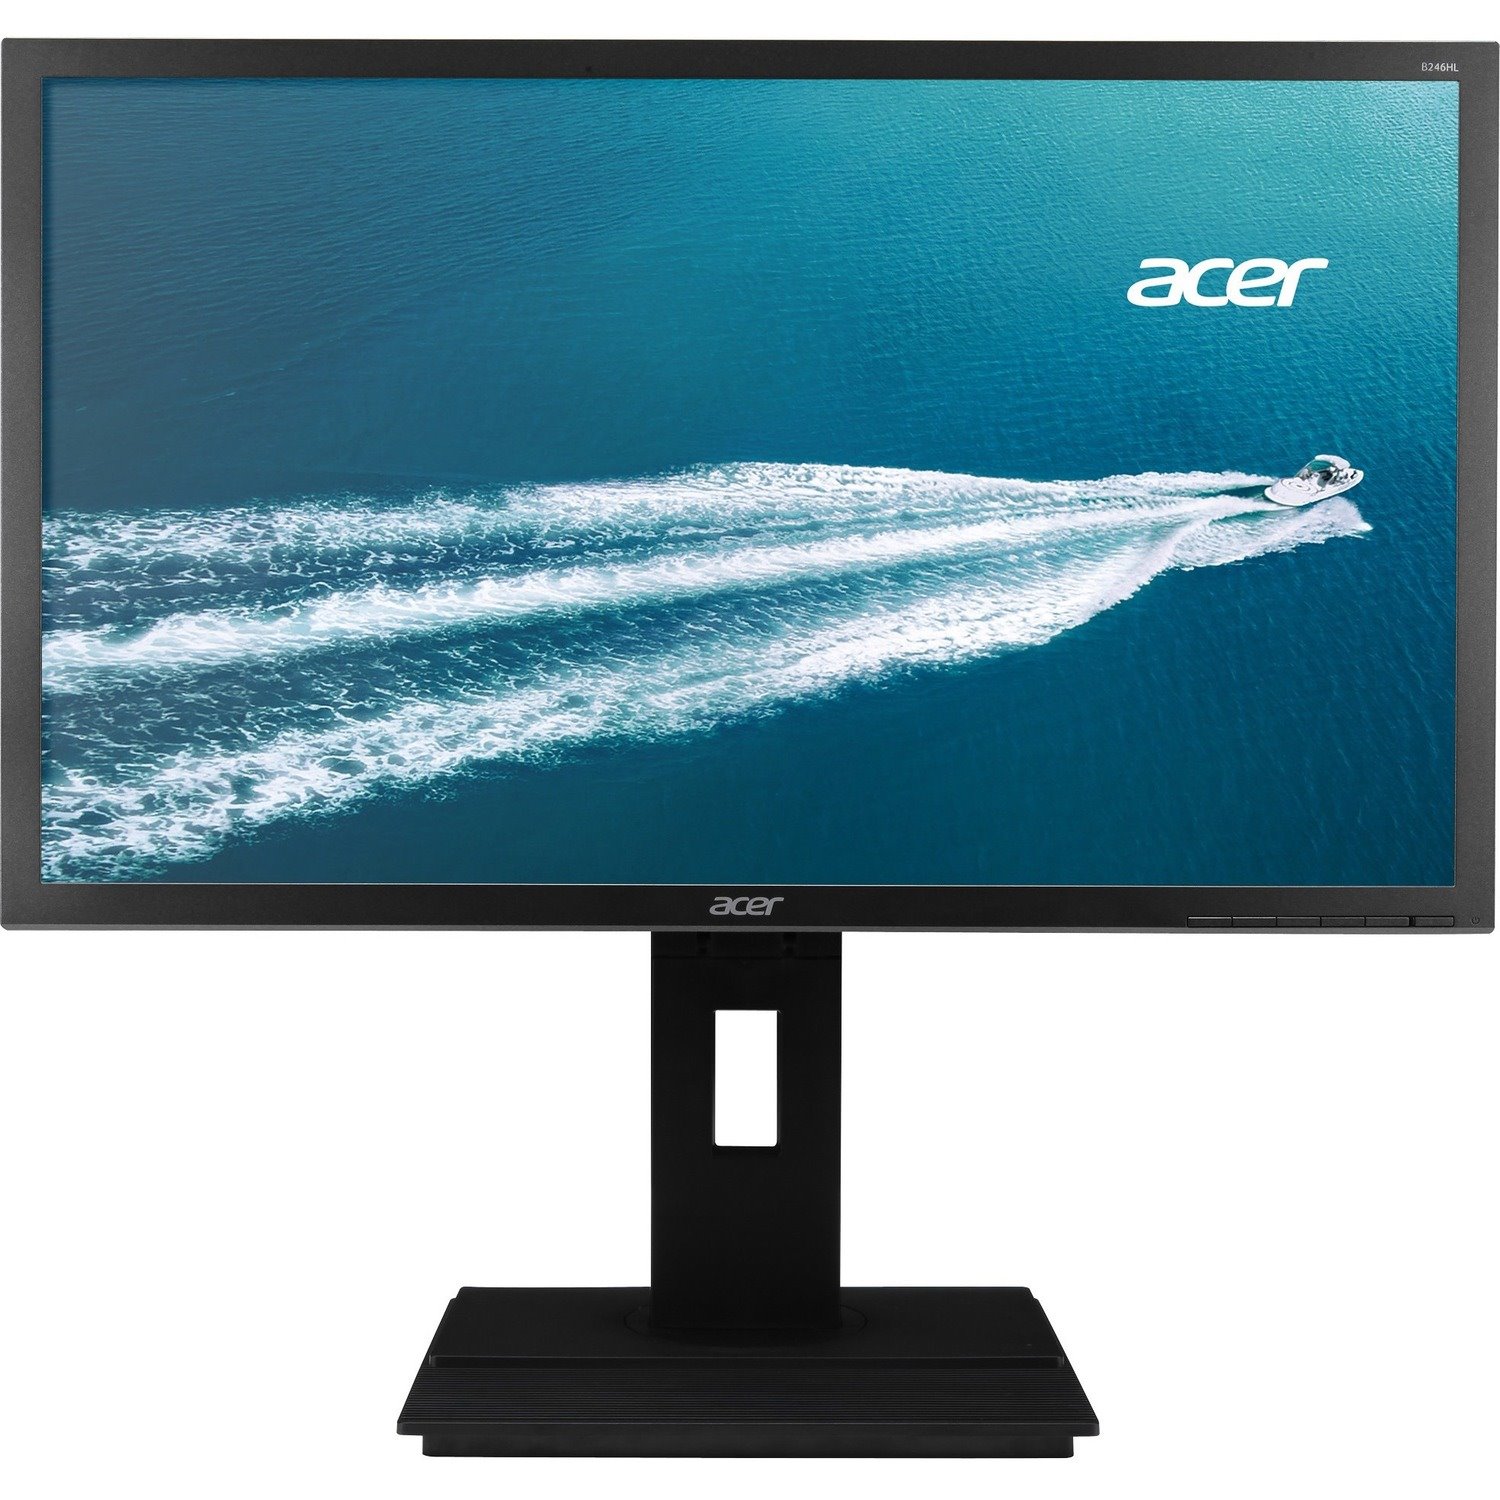 Acer B246HL 24" LED LCD Monitor - 16:9 - 5ms - Free 3 year Warranty